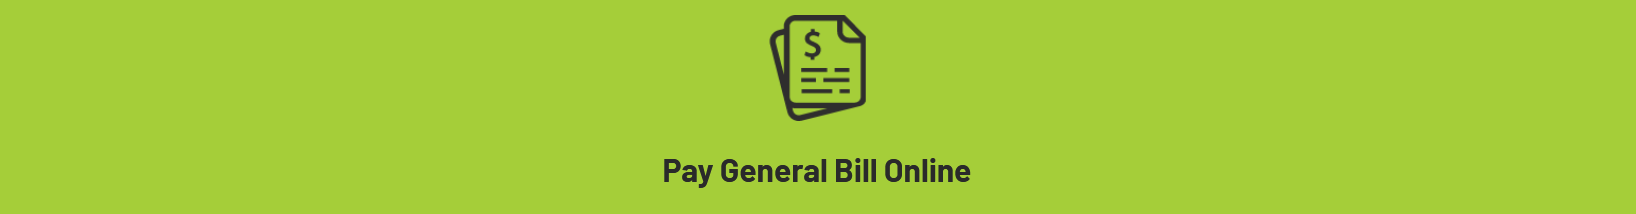 Pay General Utility Online